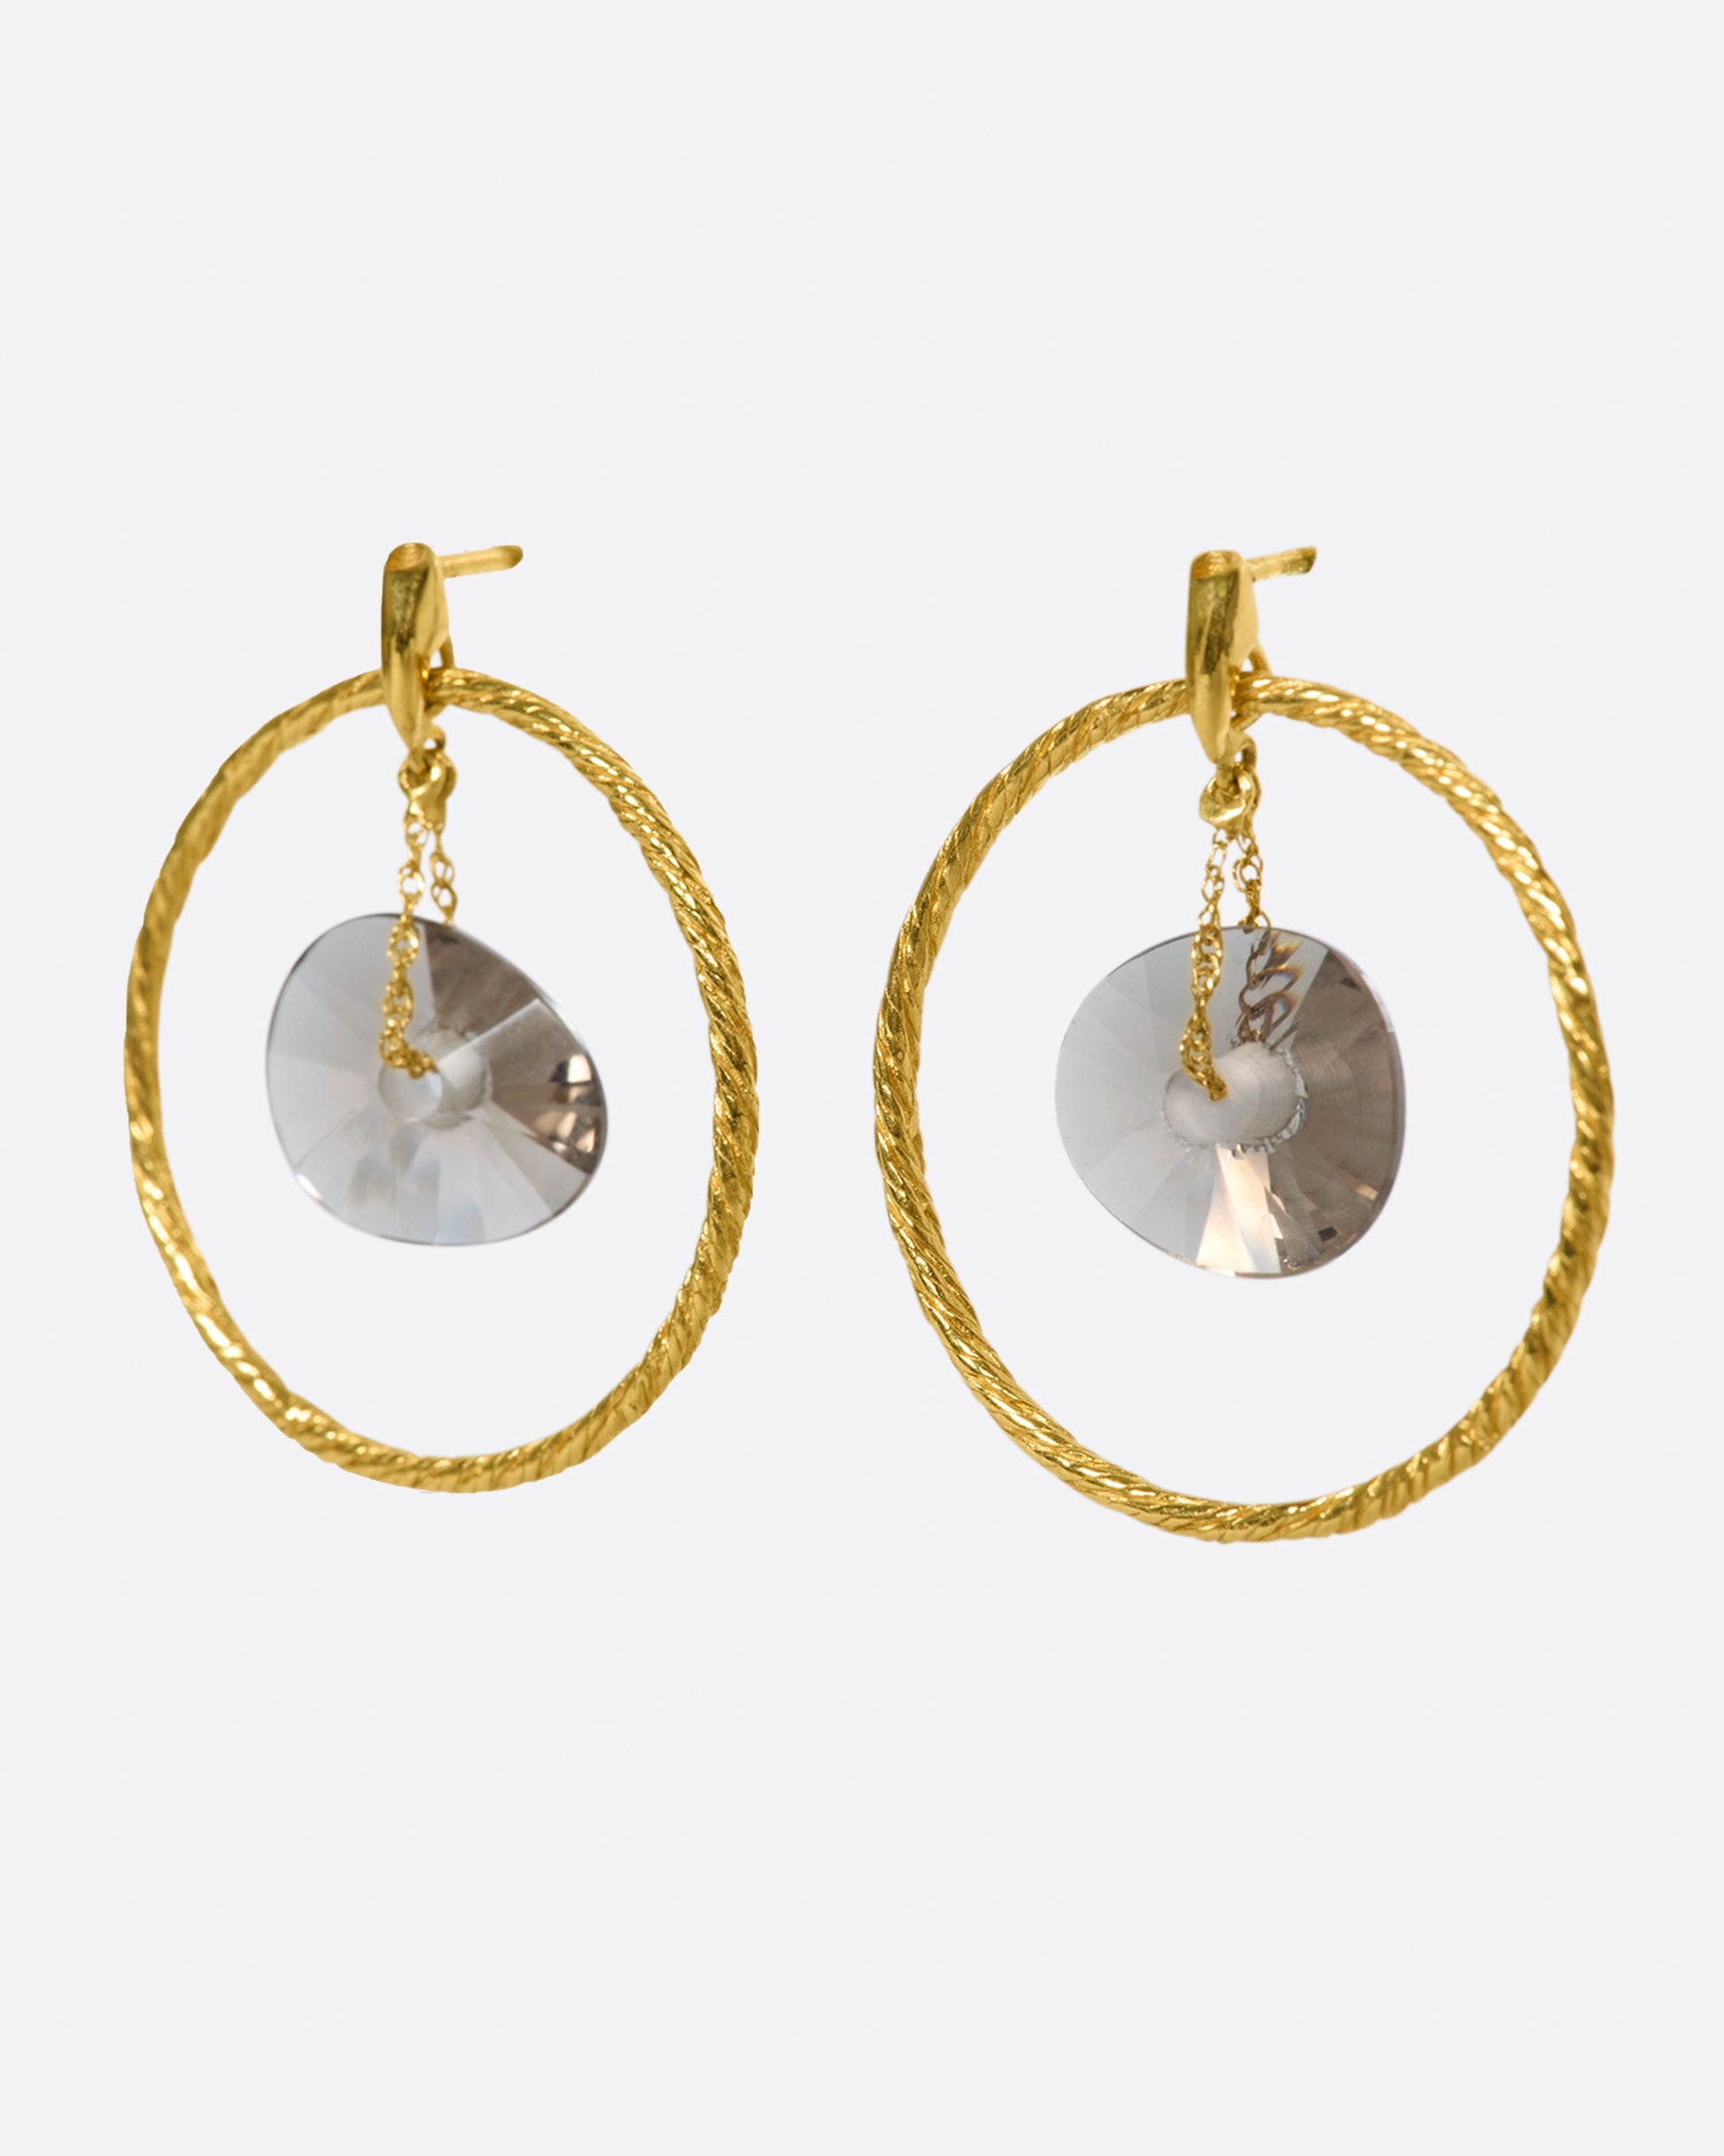 A pair of circular yellow gold wire earrings with smokey quartz donut-shaped beads hanging freely in the middle, shown from the side.